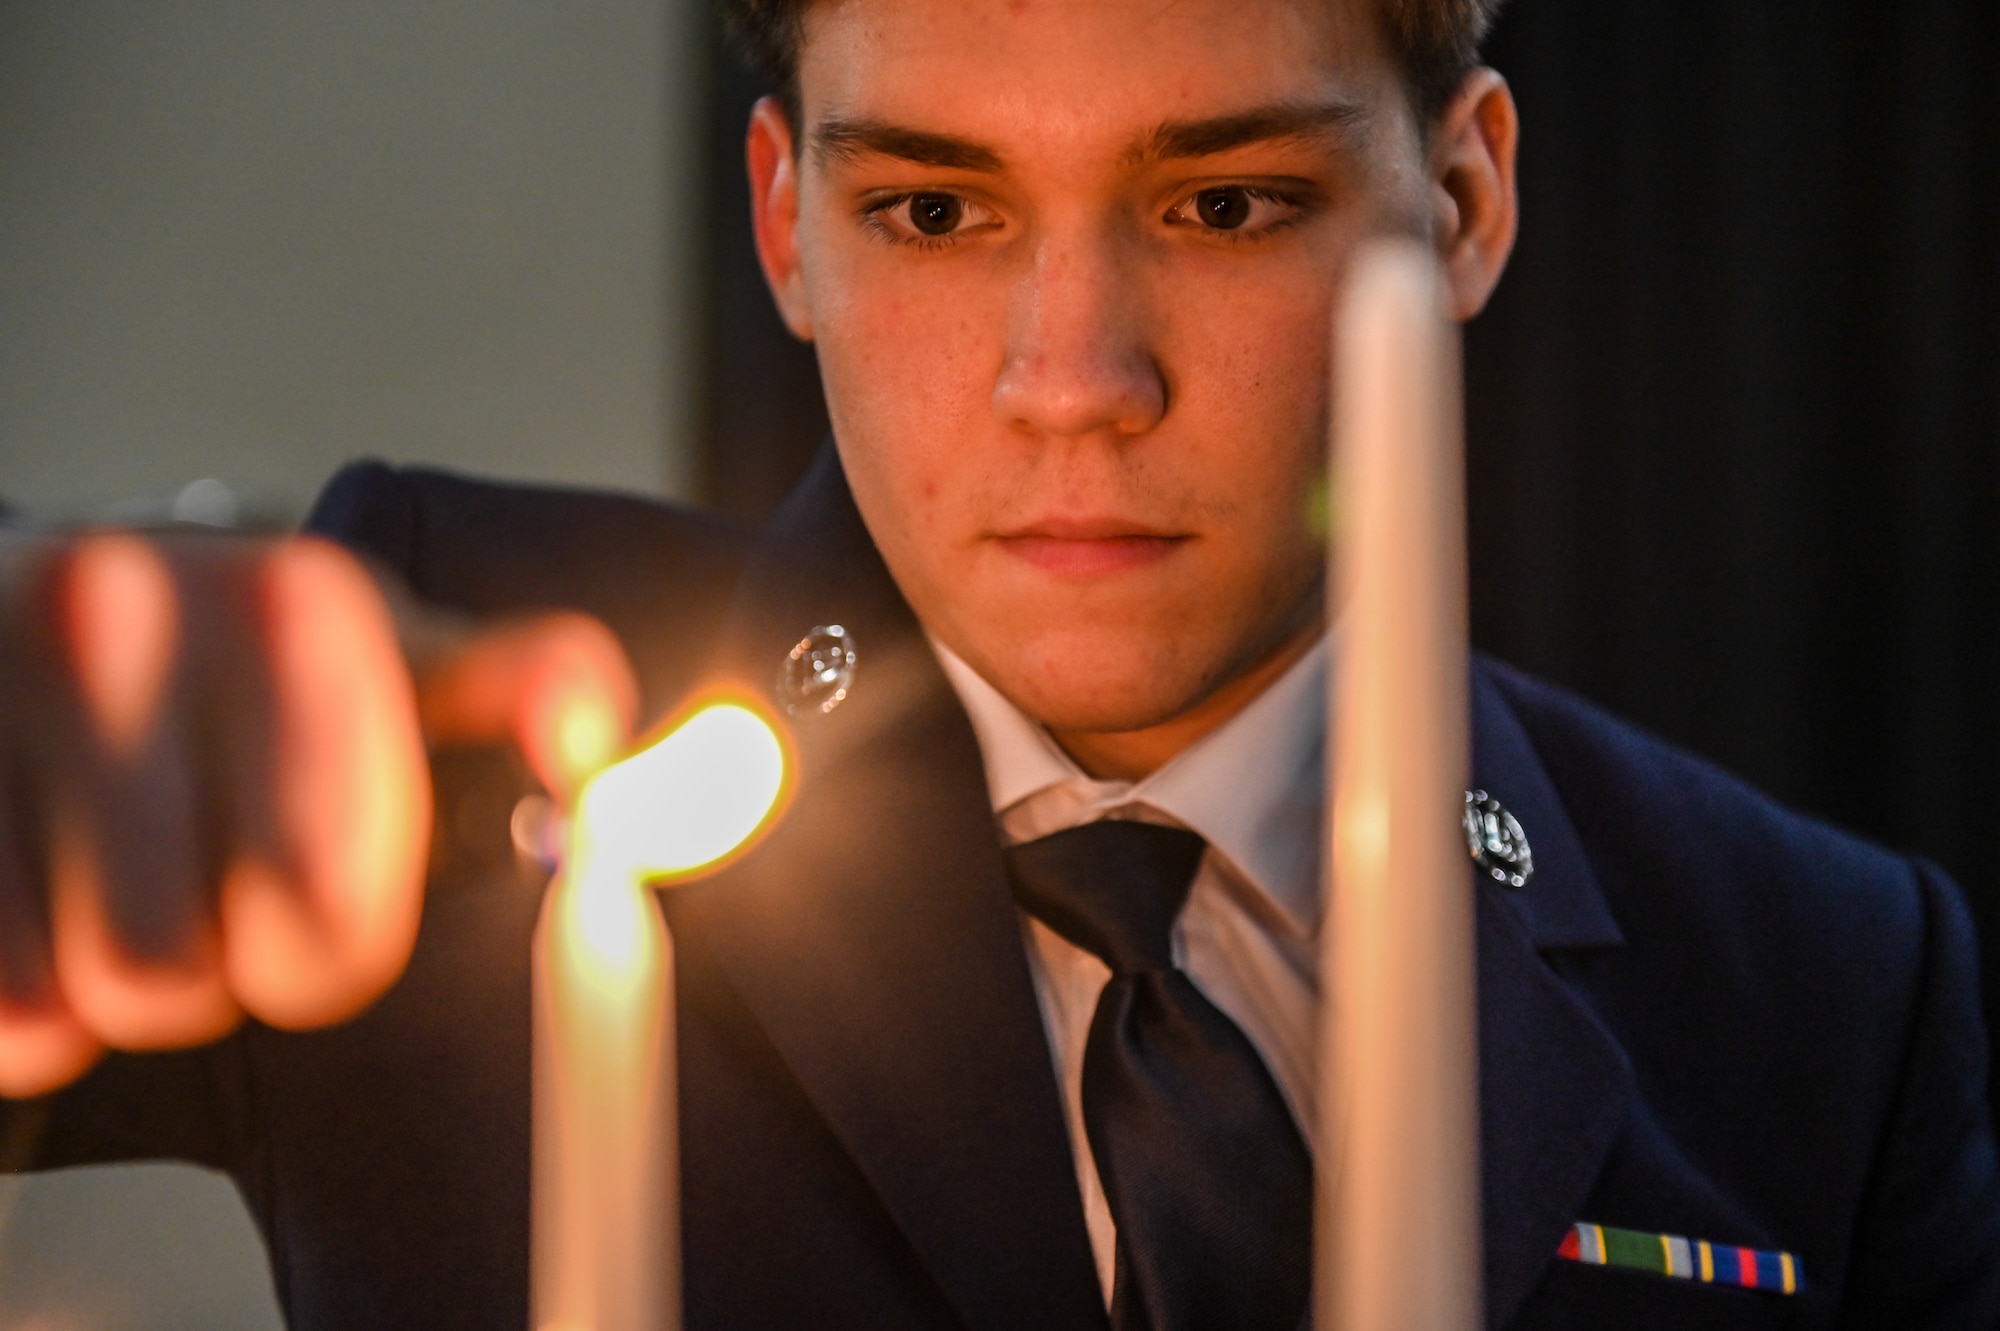 U.S. Air Force Airman 1st Class Cameron Barnes, 51st Maintenance Squadron aerospace propulsion apprentice, participates in a candle-lighting ceremony during a Chief Recognition Ceremony at Osan Air Base, Republic of Korea, March 17, 2023.